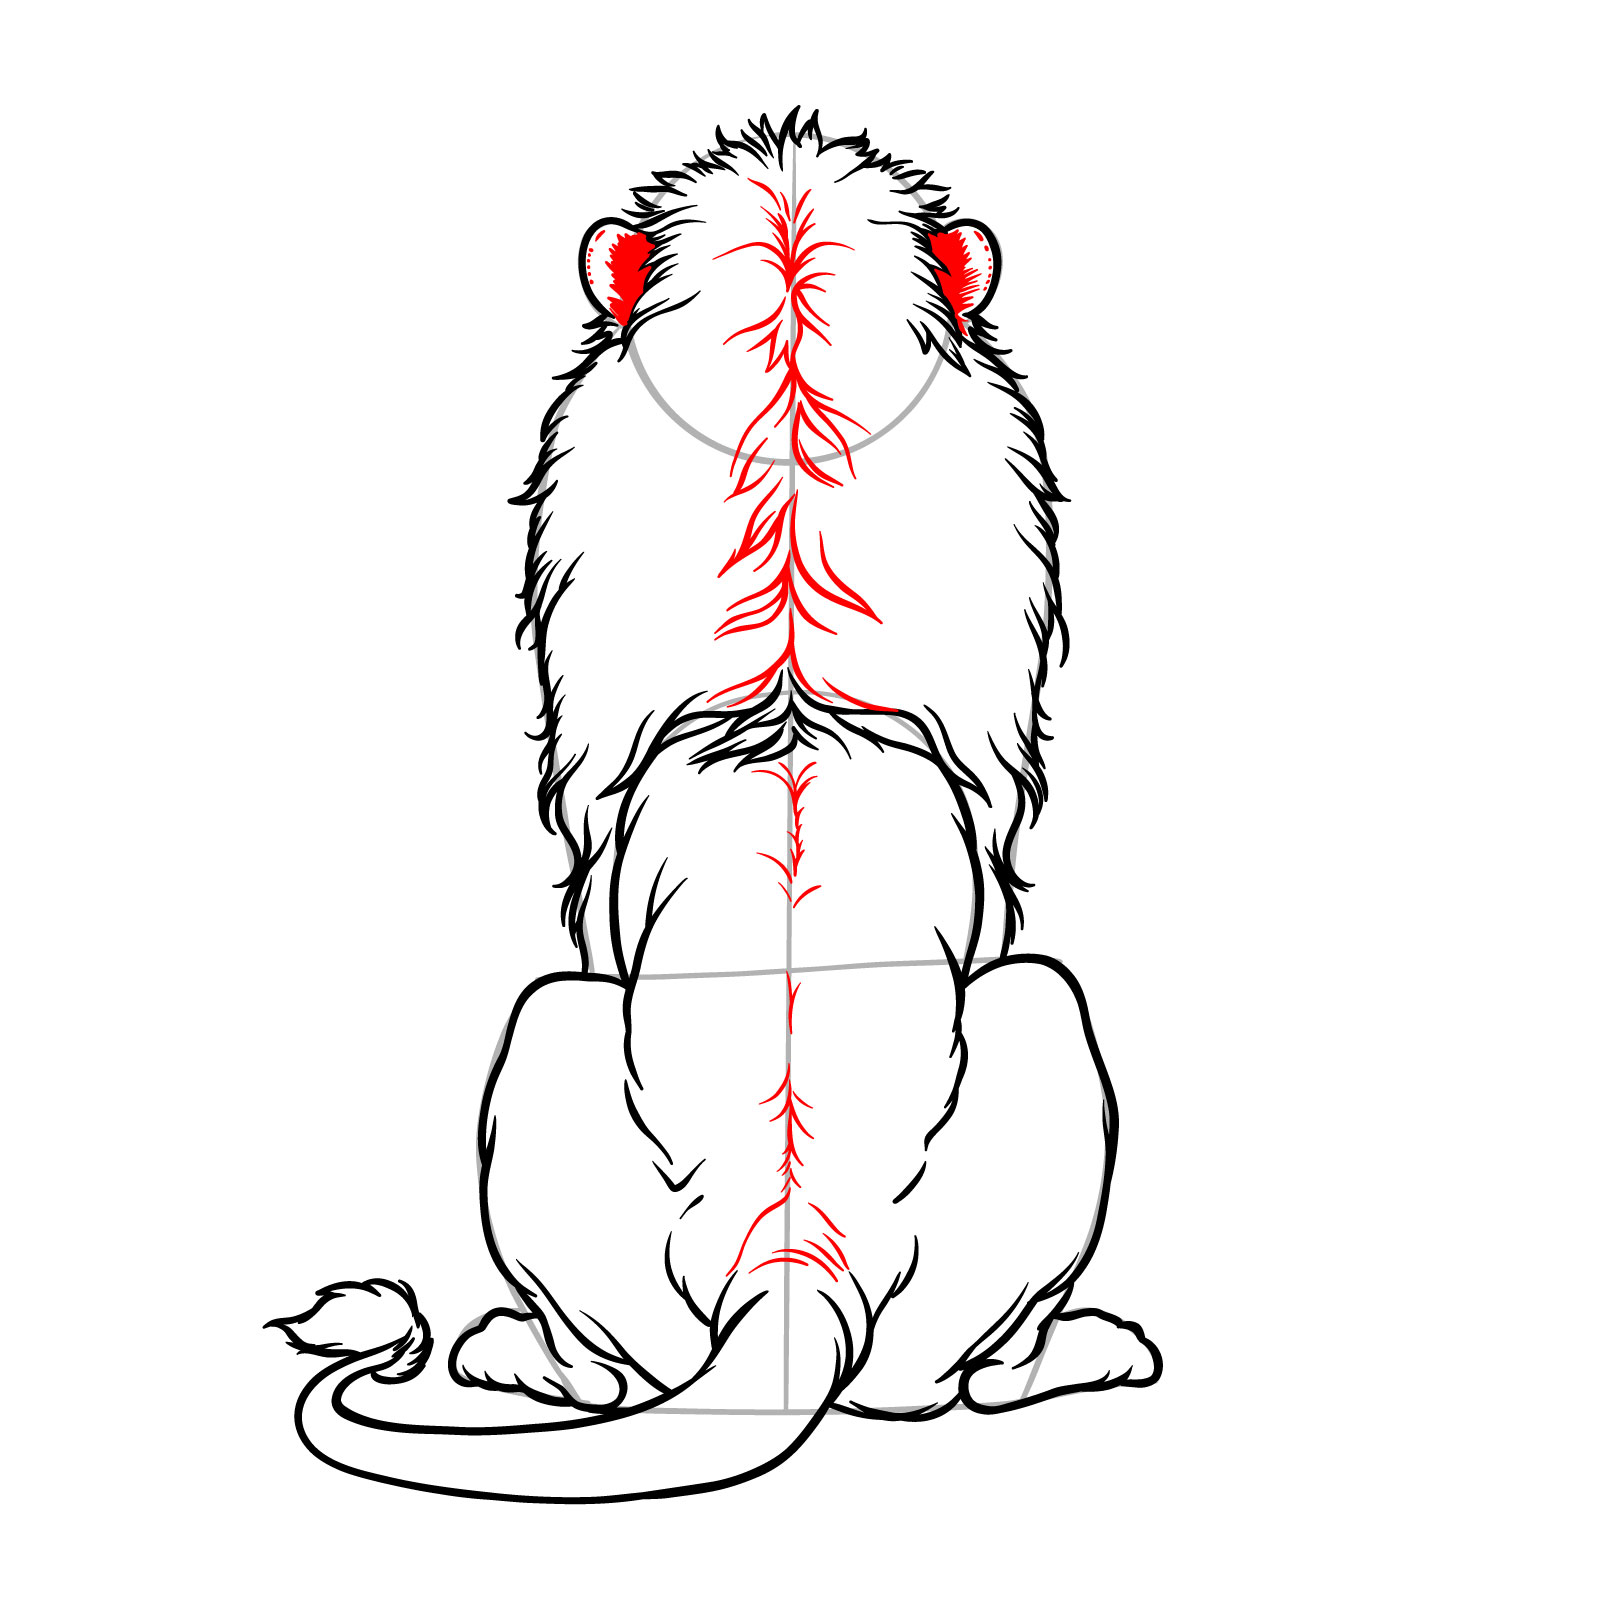 Step 11 in illustrating a sitting lion from the back view, shading ears and adding fur on the back